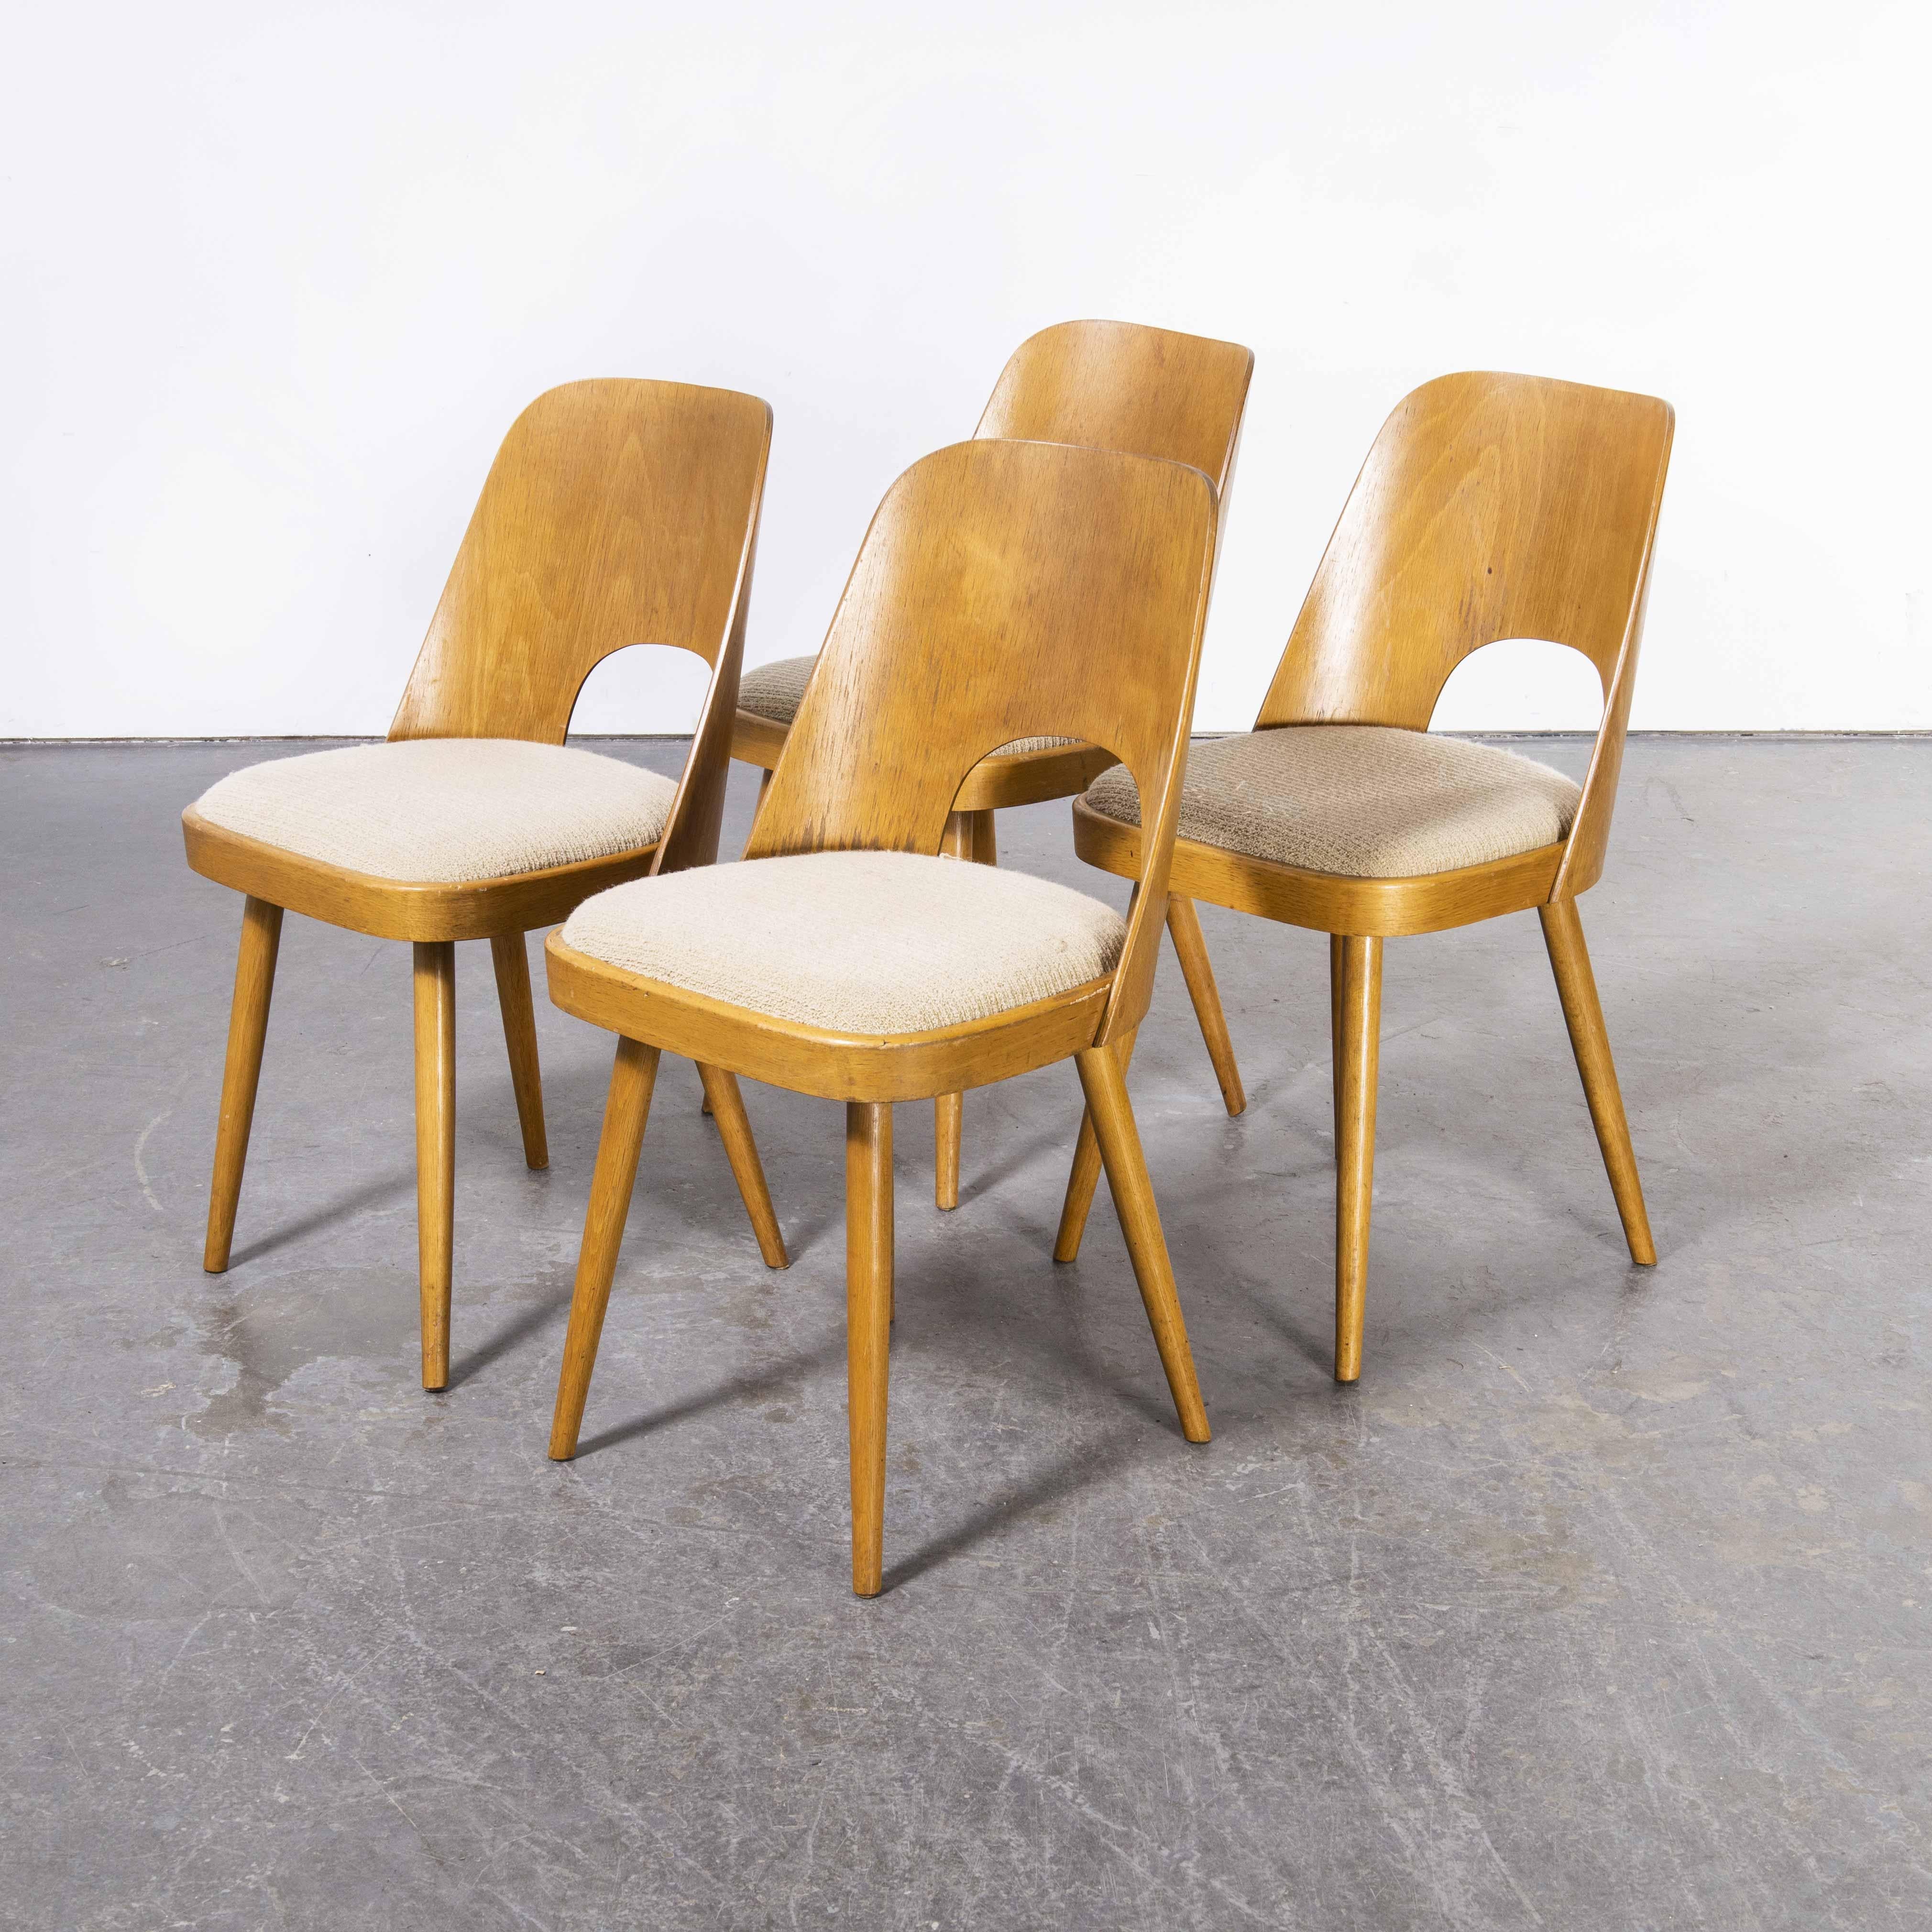 1960’s Set Of Four Beech Upholstered dining chairs – Oswald Haerdtl
1960’s Set Of Four Upholstered dining chairs – Oswald Haerdtl. These chairs were produced by the famous Czech firm Ton, still trading today and producing beautiful furniture, they